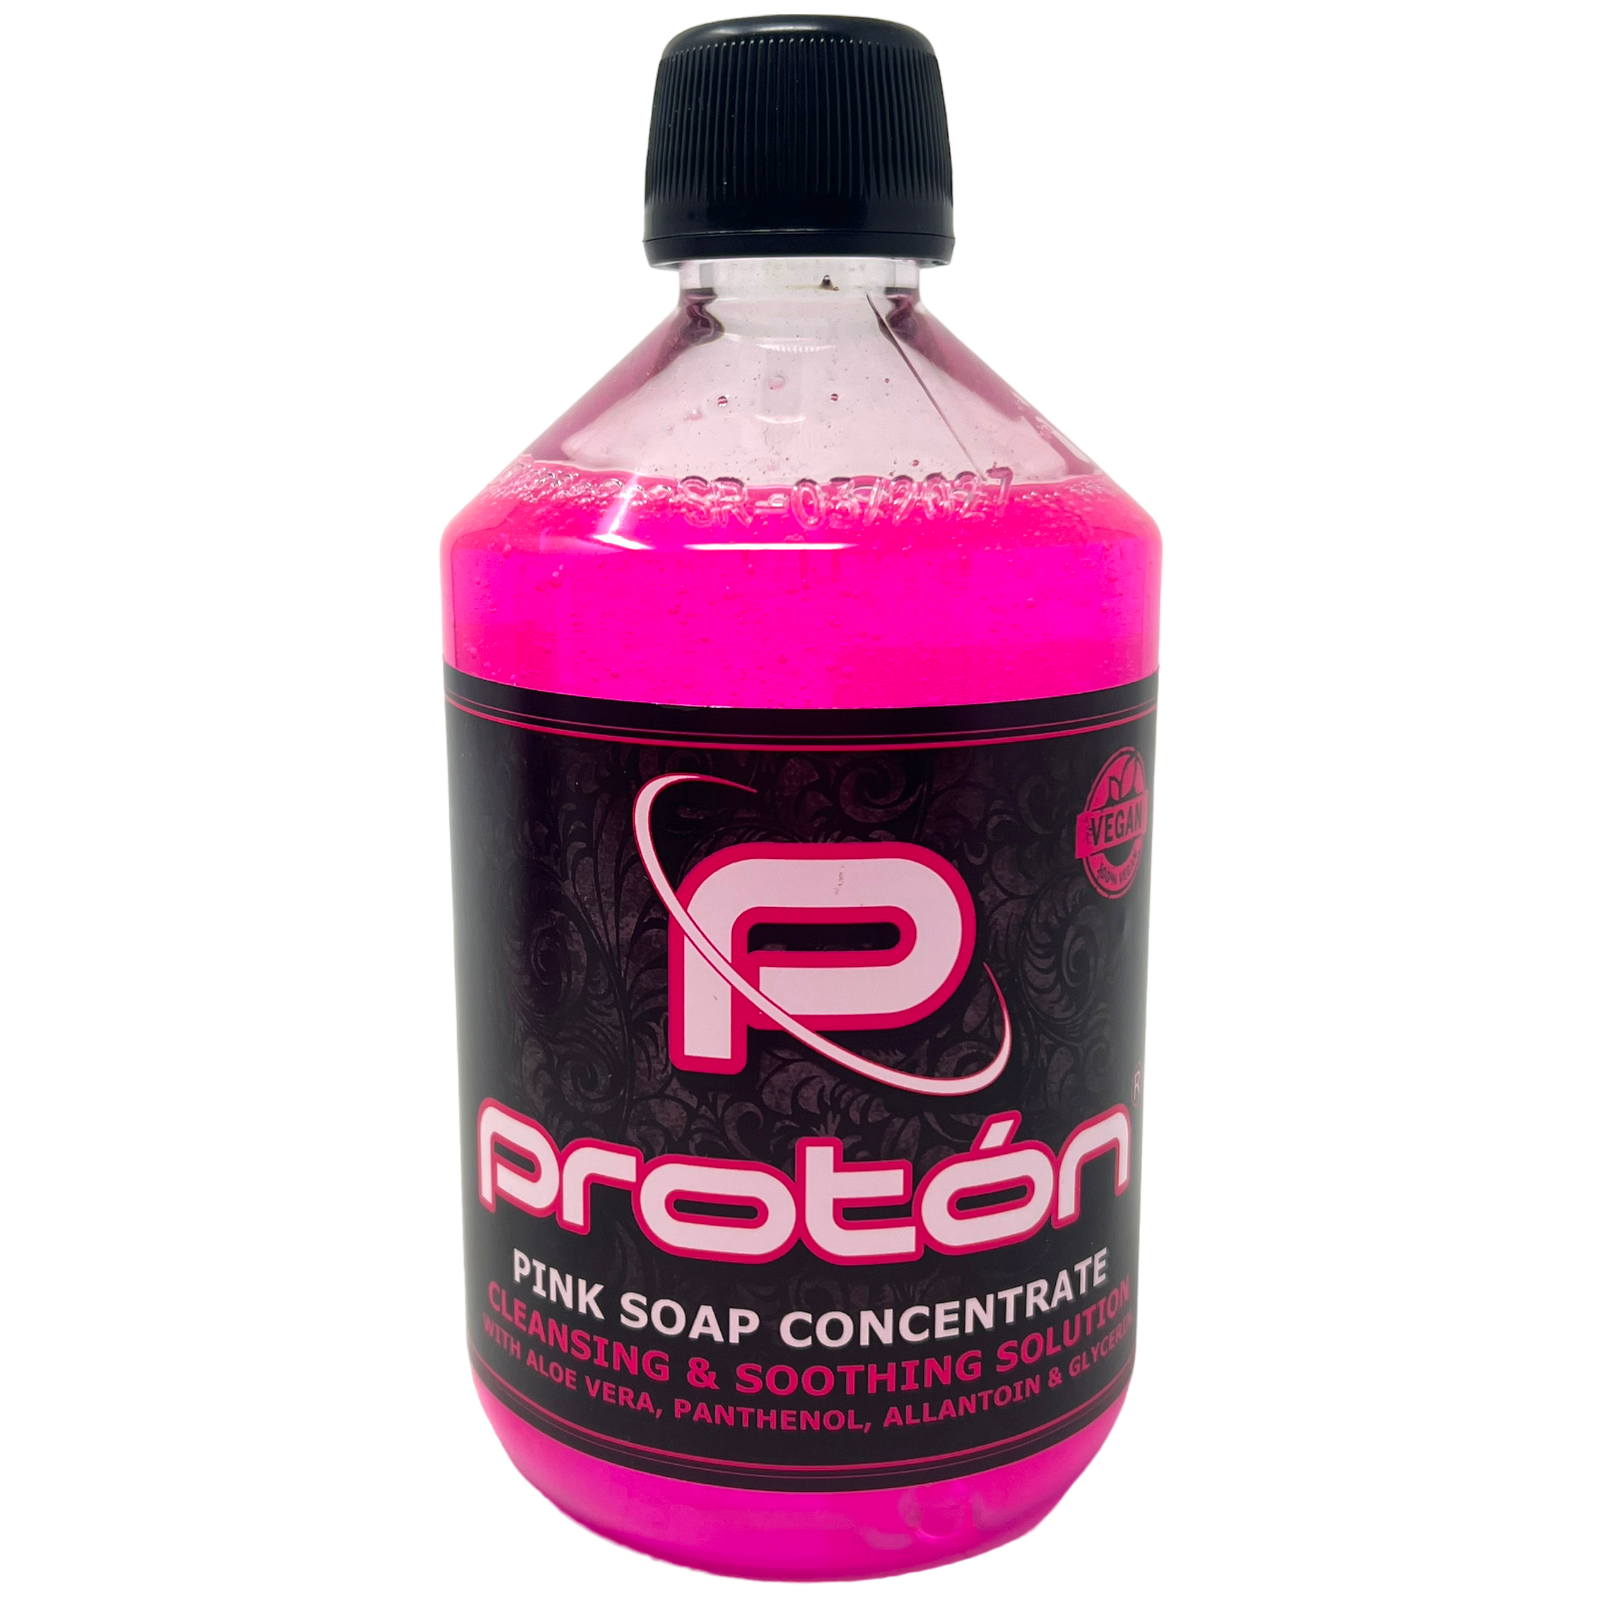 protonpinksoapconcentrate1x500ml-1